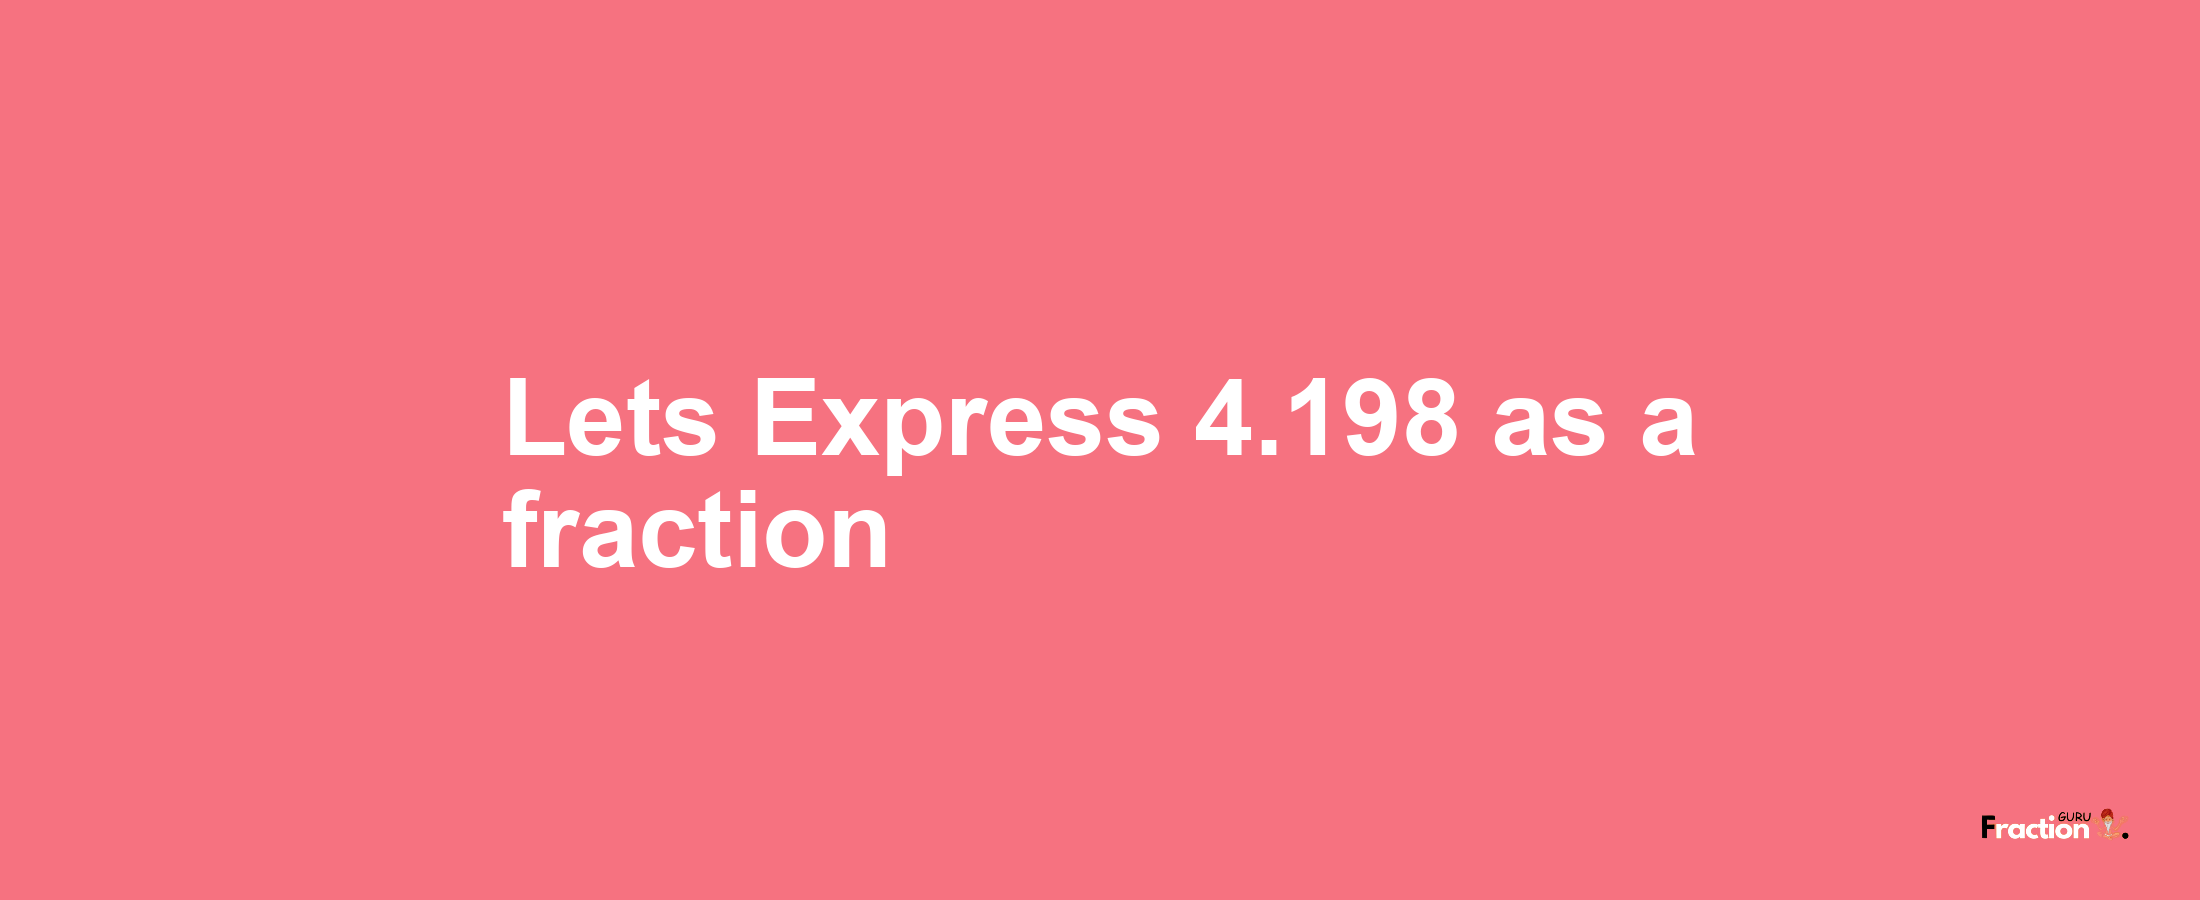 Lets Express 4.198 as afraction